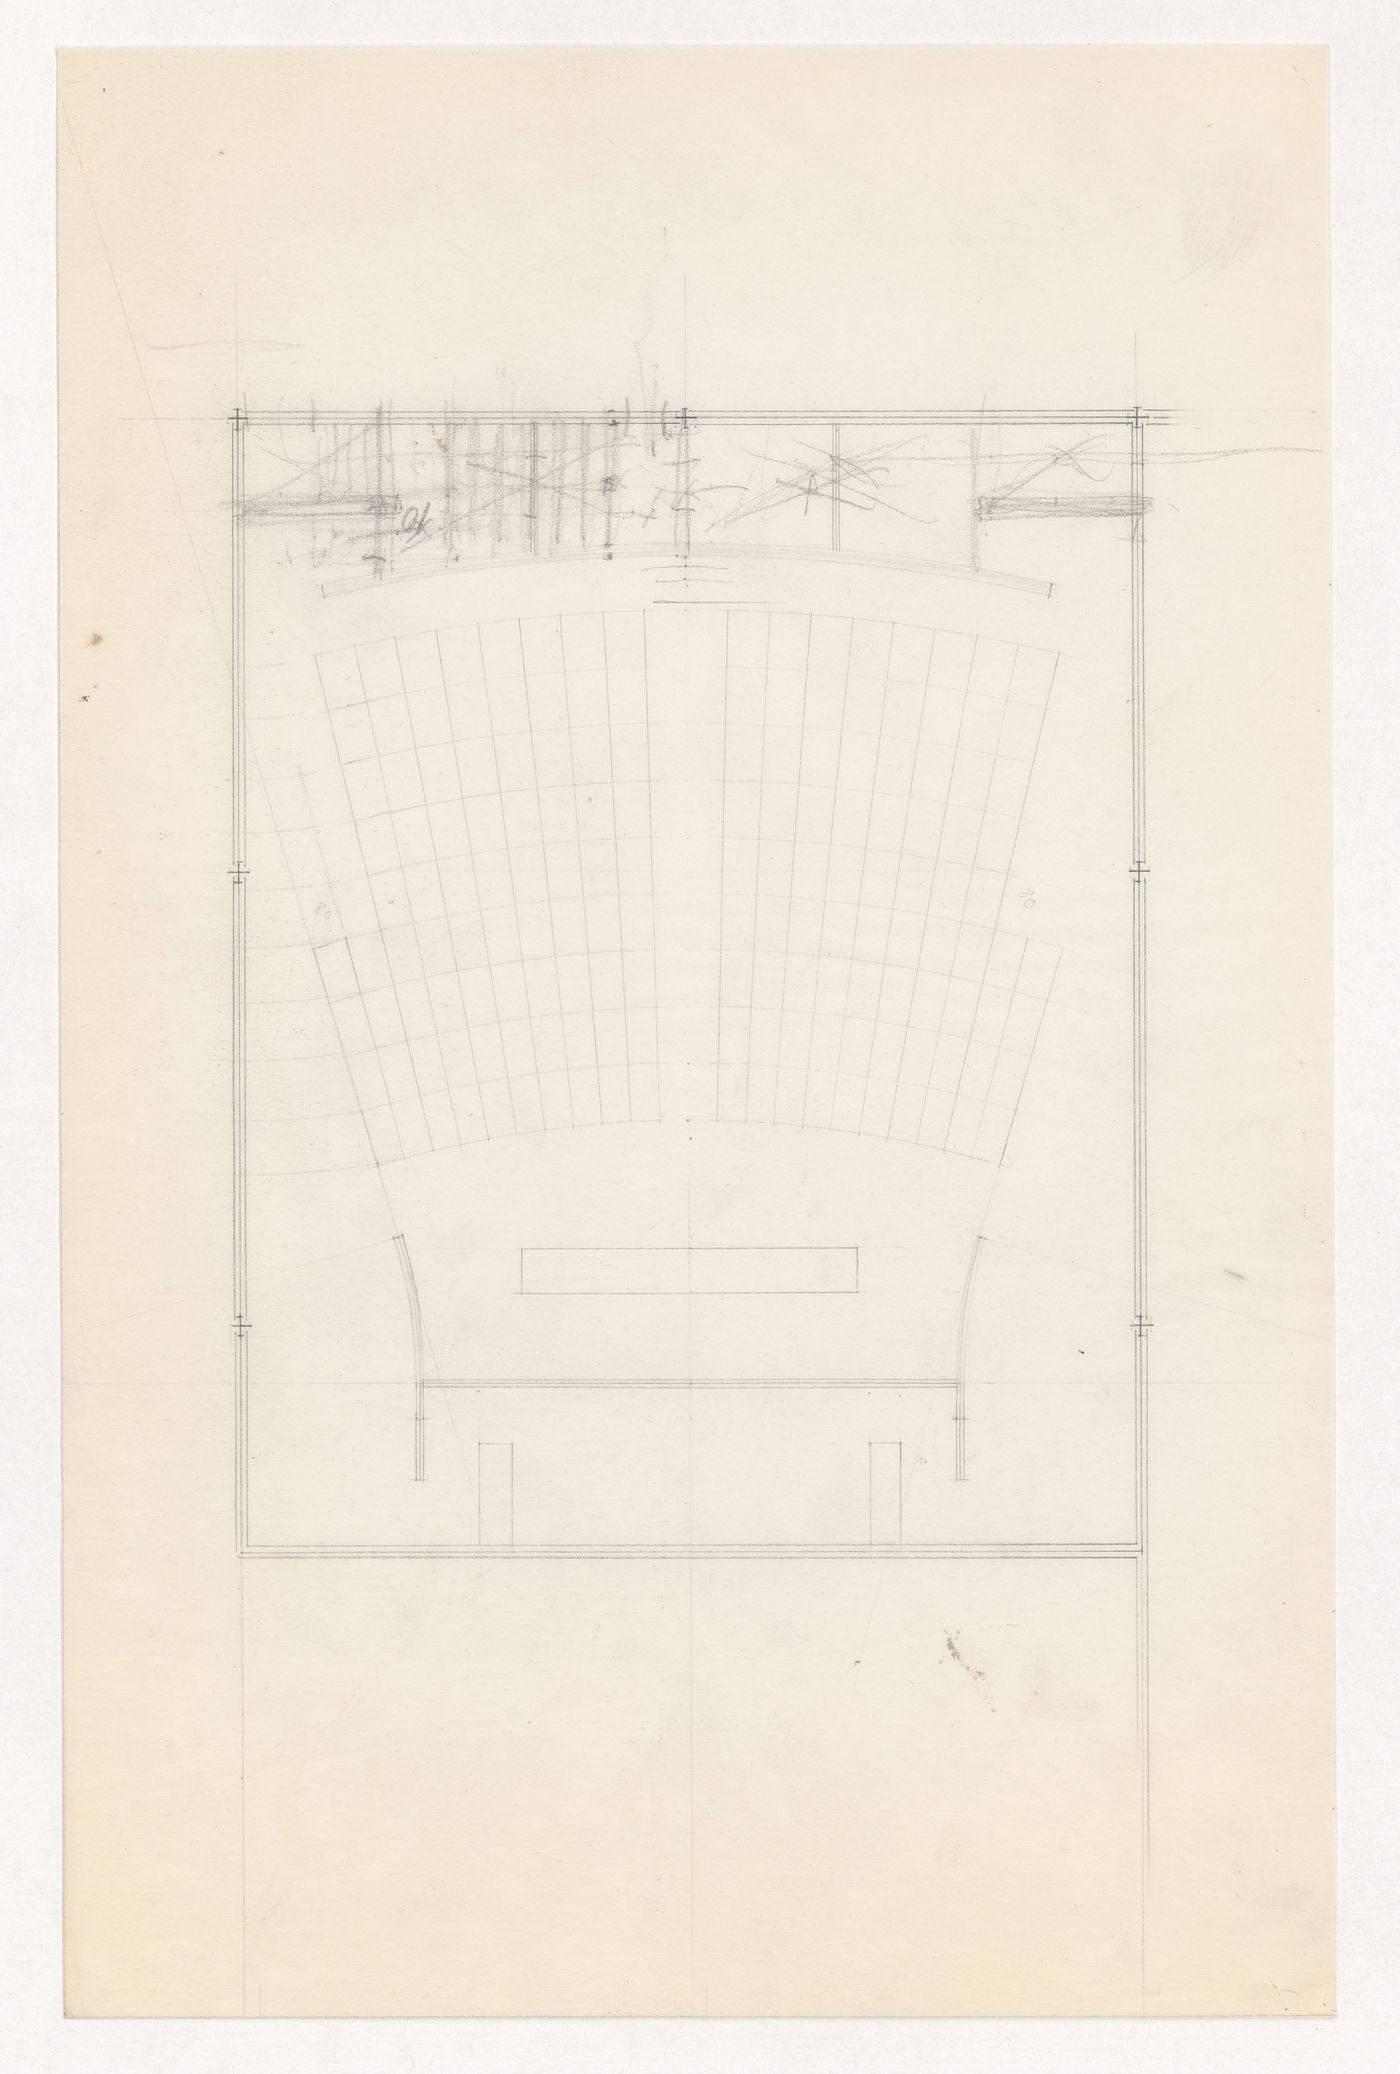 Plan for an auditorium for the Metallurgy Building, Illinois Institute of Technology, Chicago